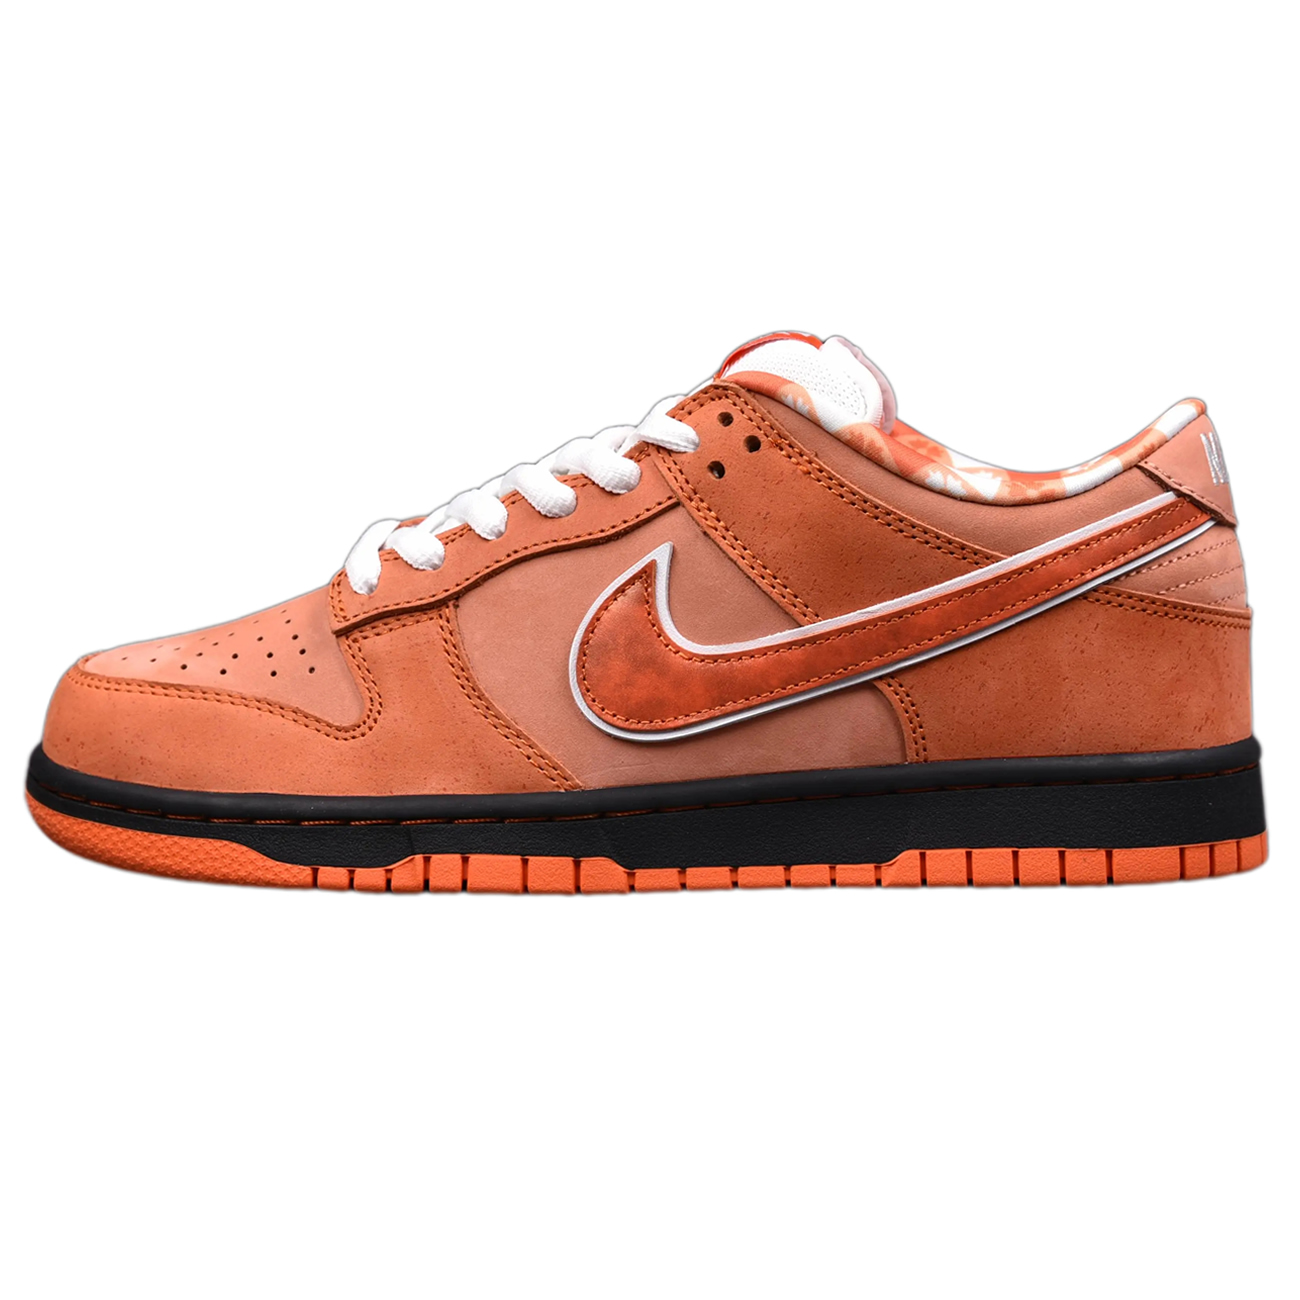 Nike Sb Dunk Low Concepts Red Lobster Fd8776 800 (56) - newkick.org